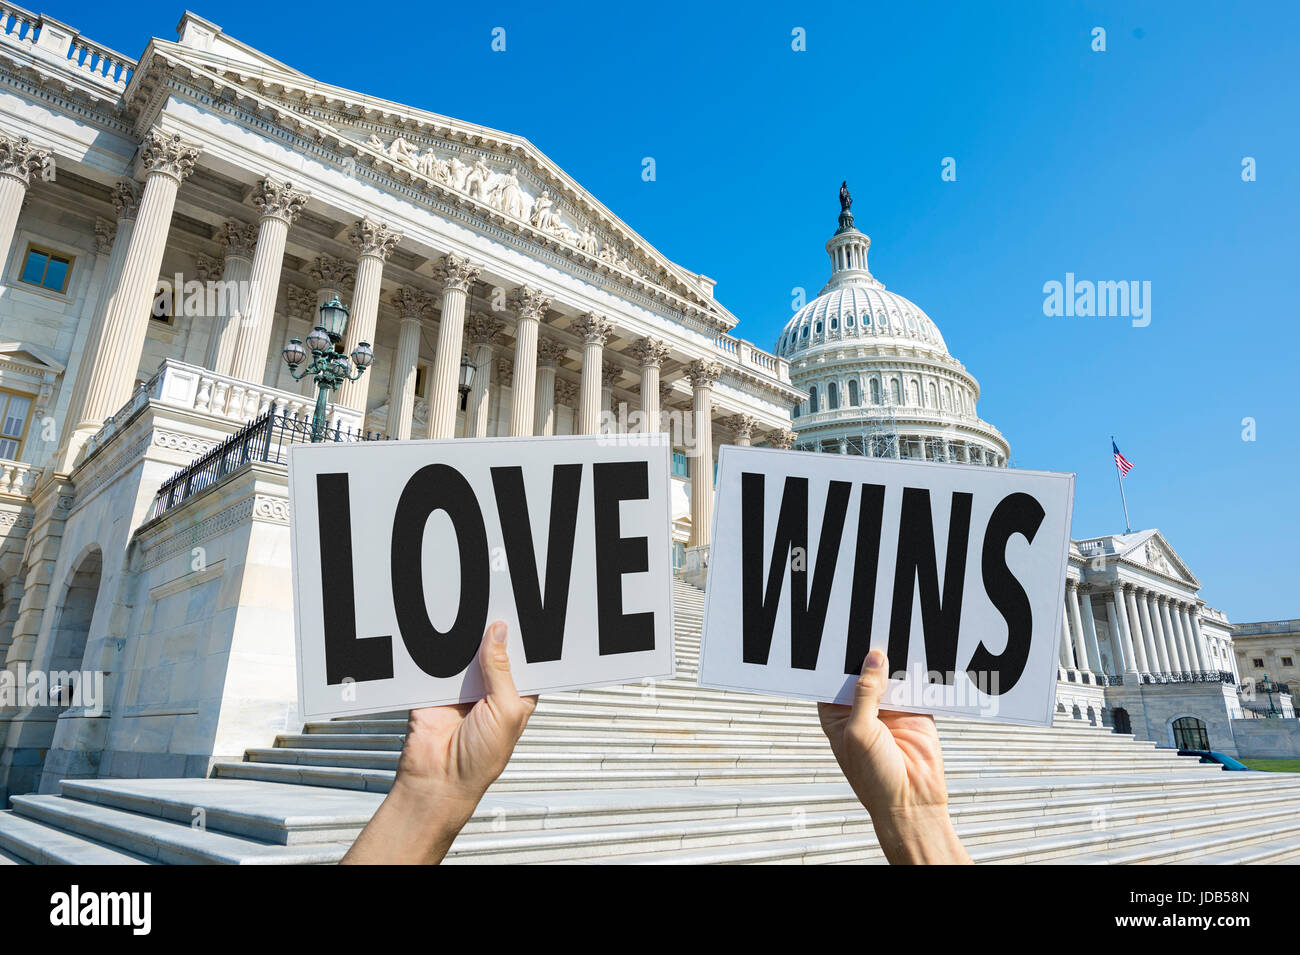 Hands of political protesters holding signs of the positive message LOVE WINS in front of the Capitol Building in Washington DC, USA Stock Photo